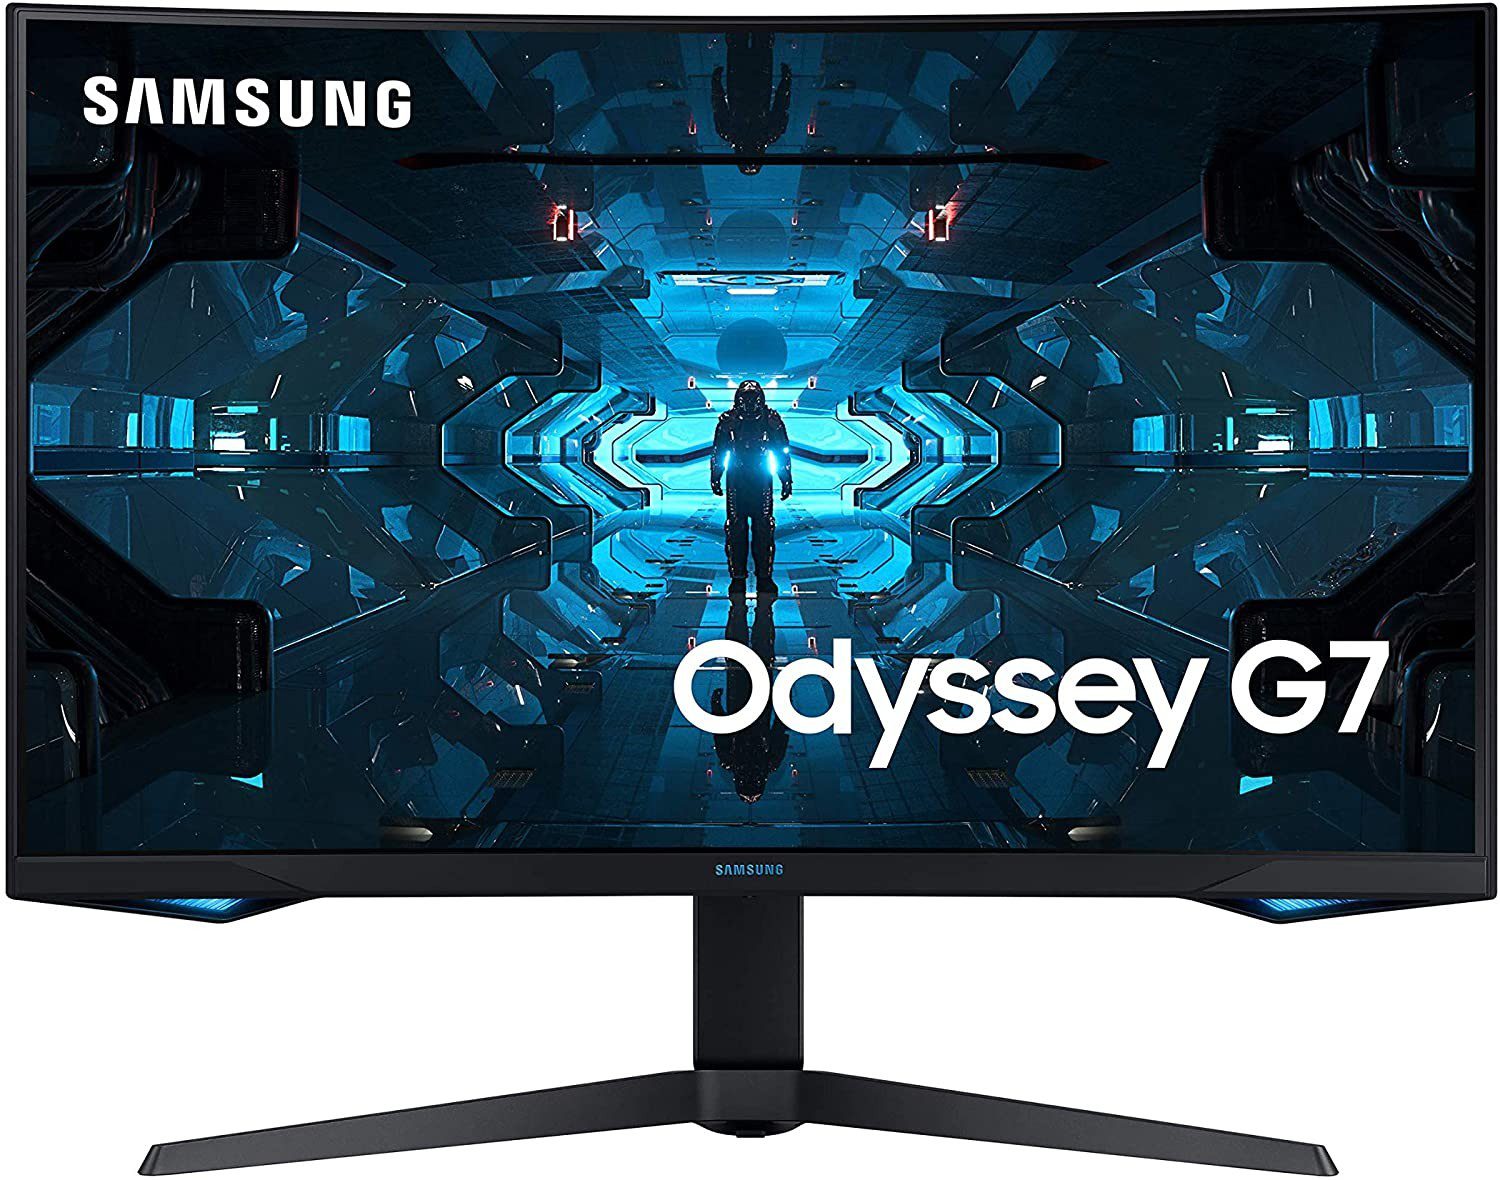 Samsung 32" Odyssey G7 Gaming Monitore With QHD 1000R Curved Screen 240Hz Refresh rate VESA display HDR10- LC27G75TQSMXUE